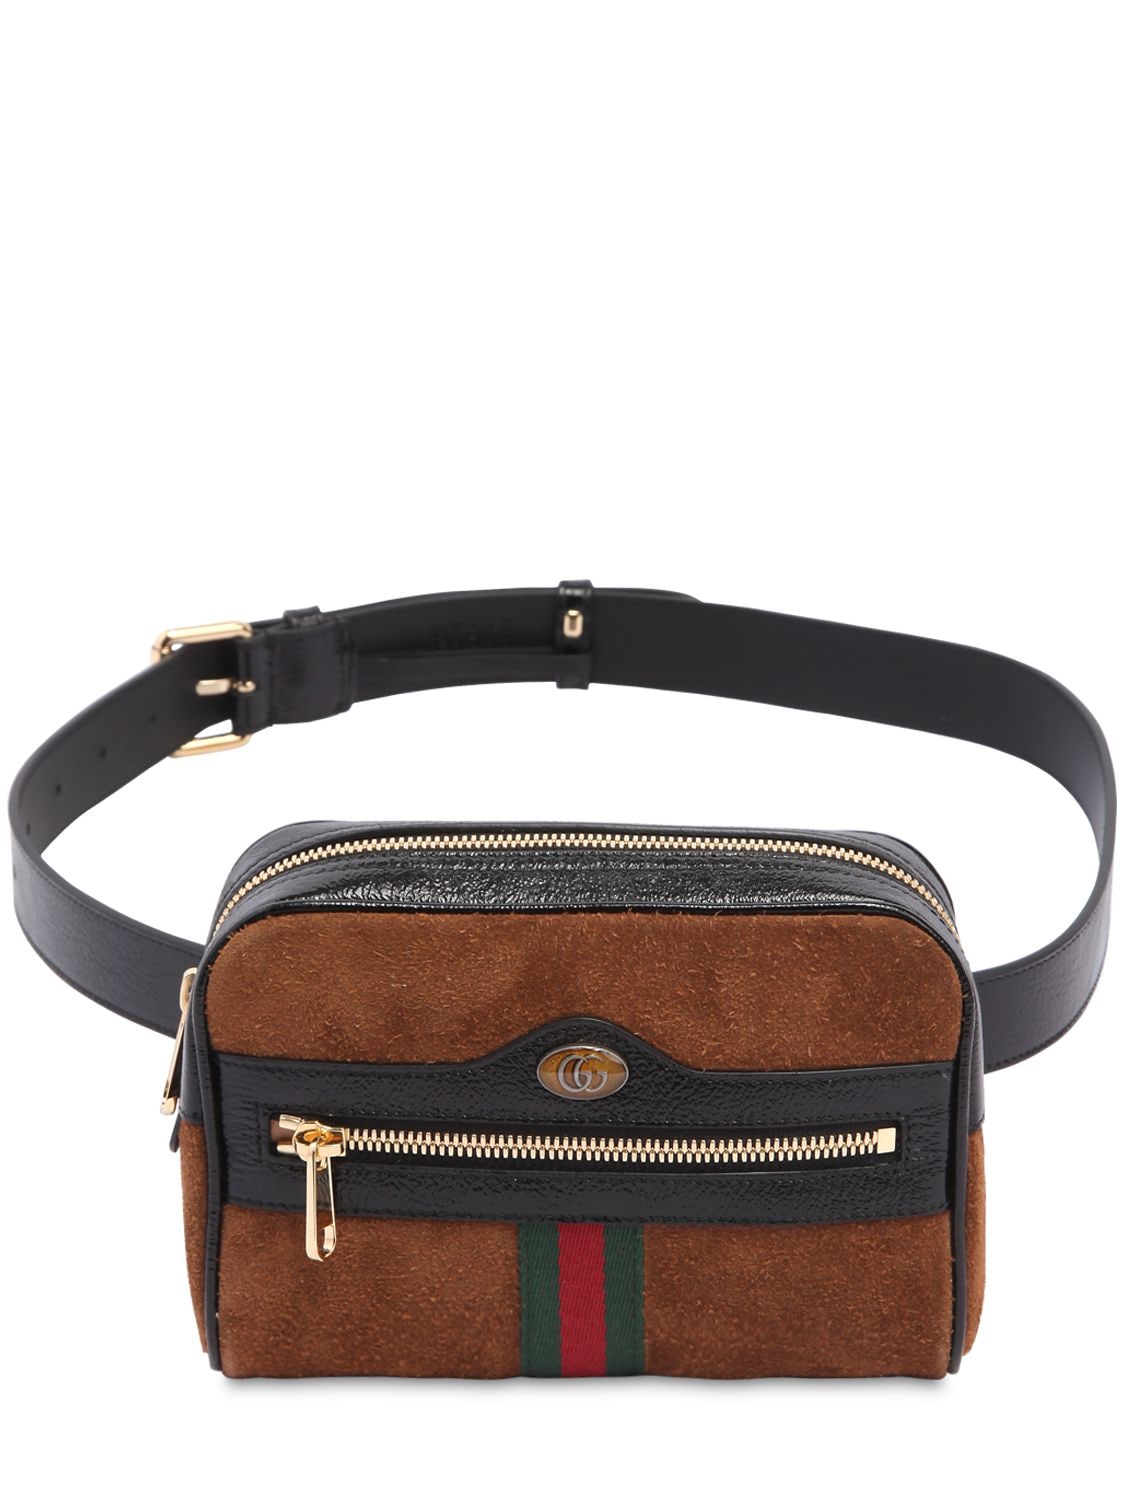 GUCCI SMALL OPHIDIA SUEDE BELT PACK,67IH0I016-Mjg2Mw2